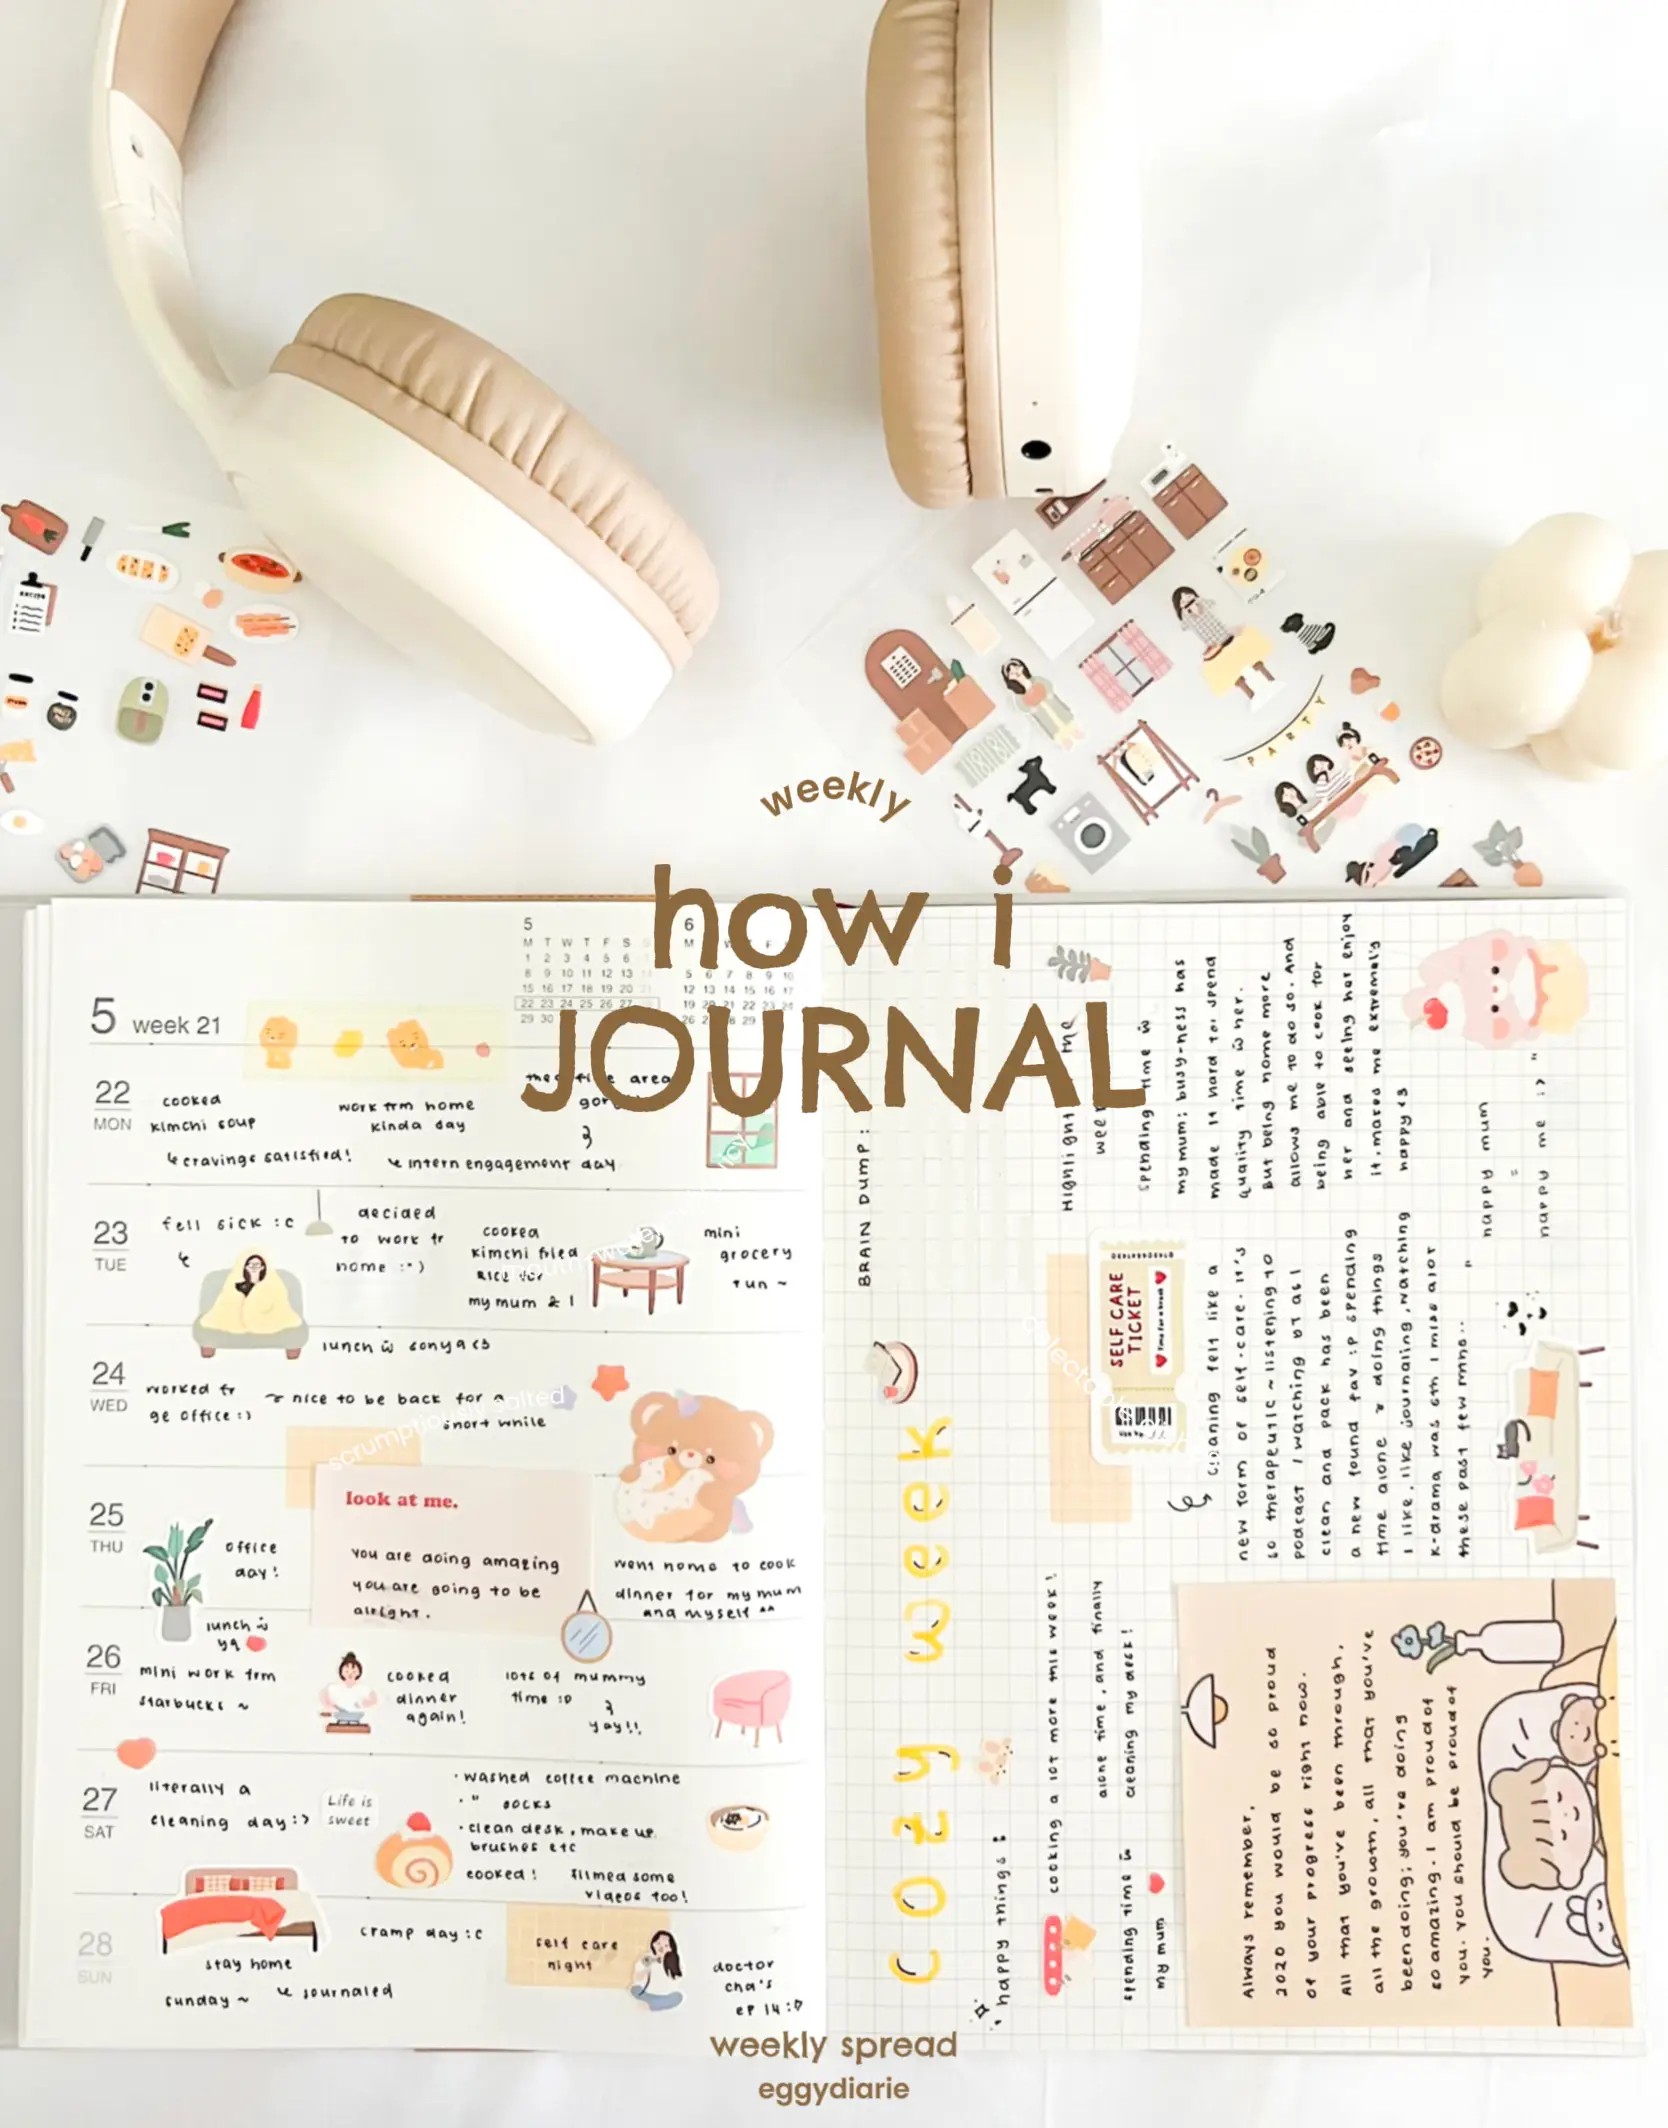 journaling tips to get started 📓's images(0)